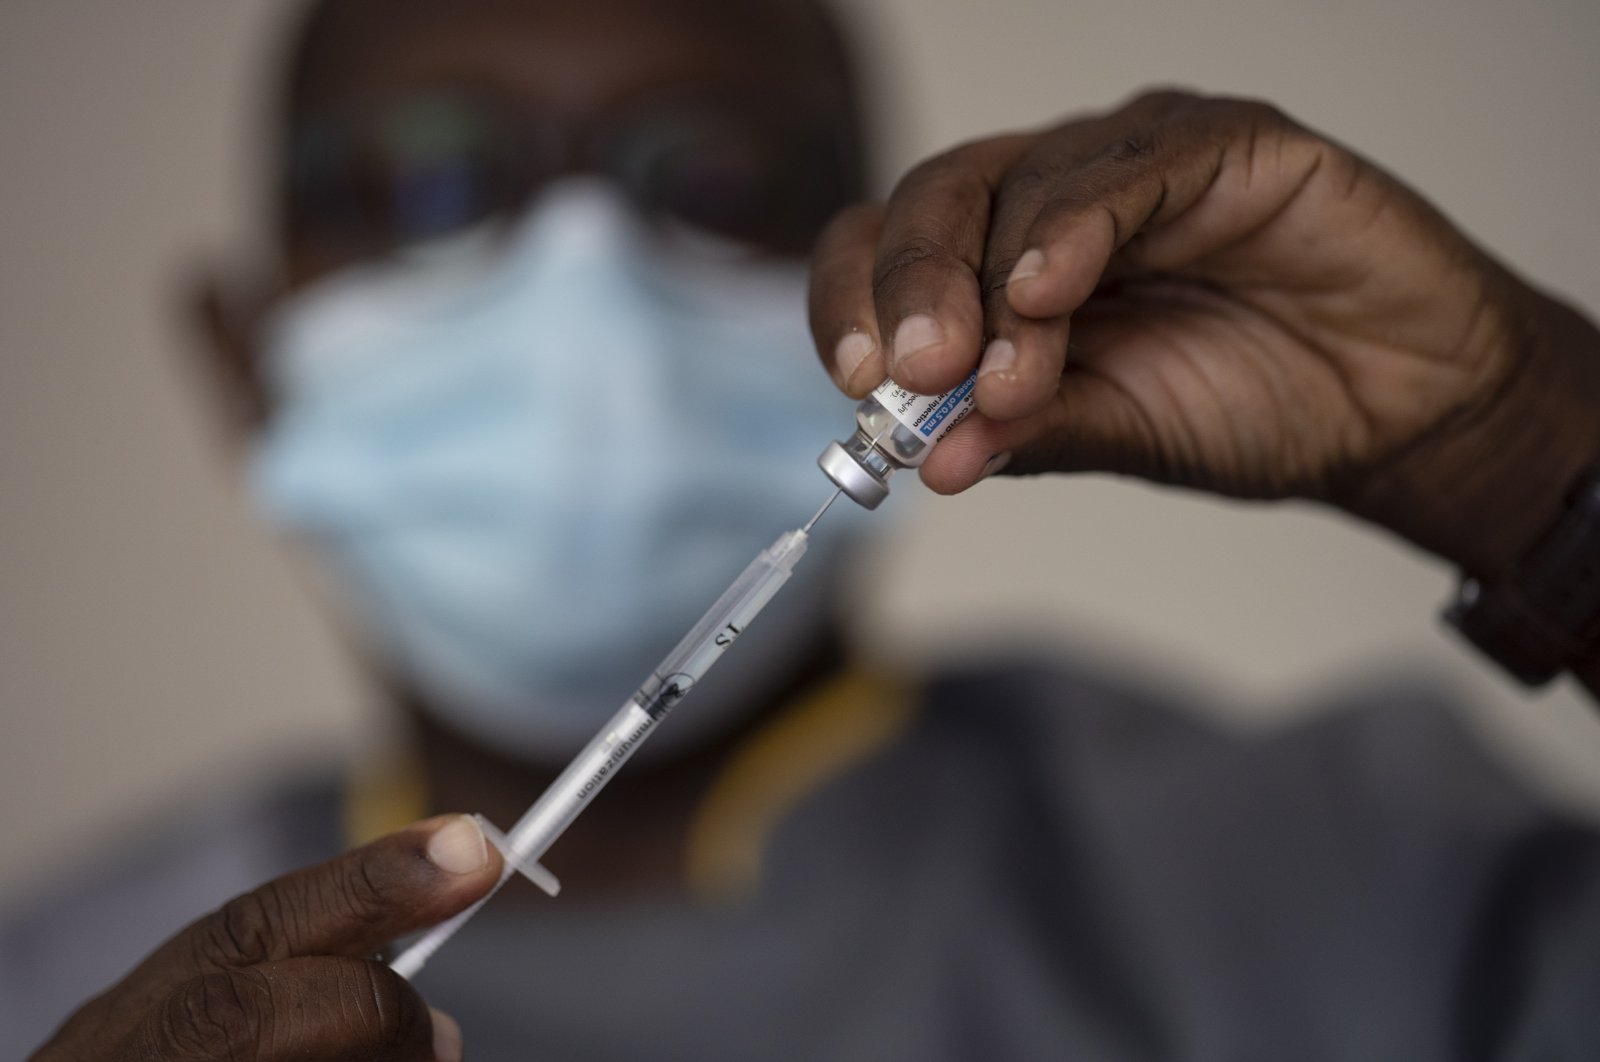 A health worker administers a dose of the Janssen COVID-19 vaccine by Johnson & Johnson in the Medina neighborhood in Dakar, Senegal, on July 28, 2021. (AP Photo)